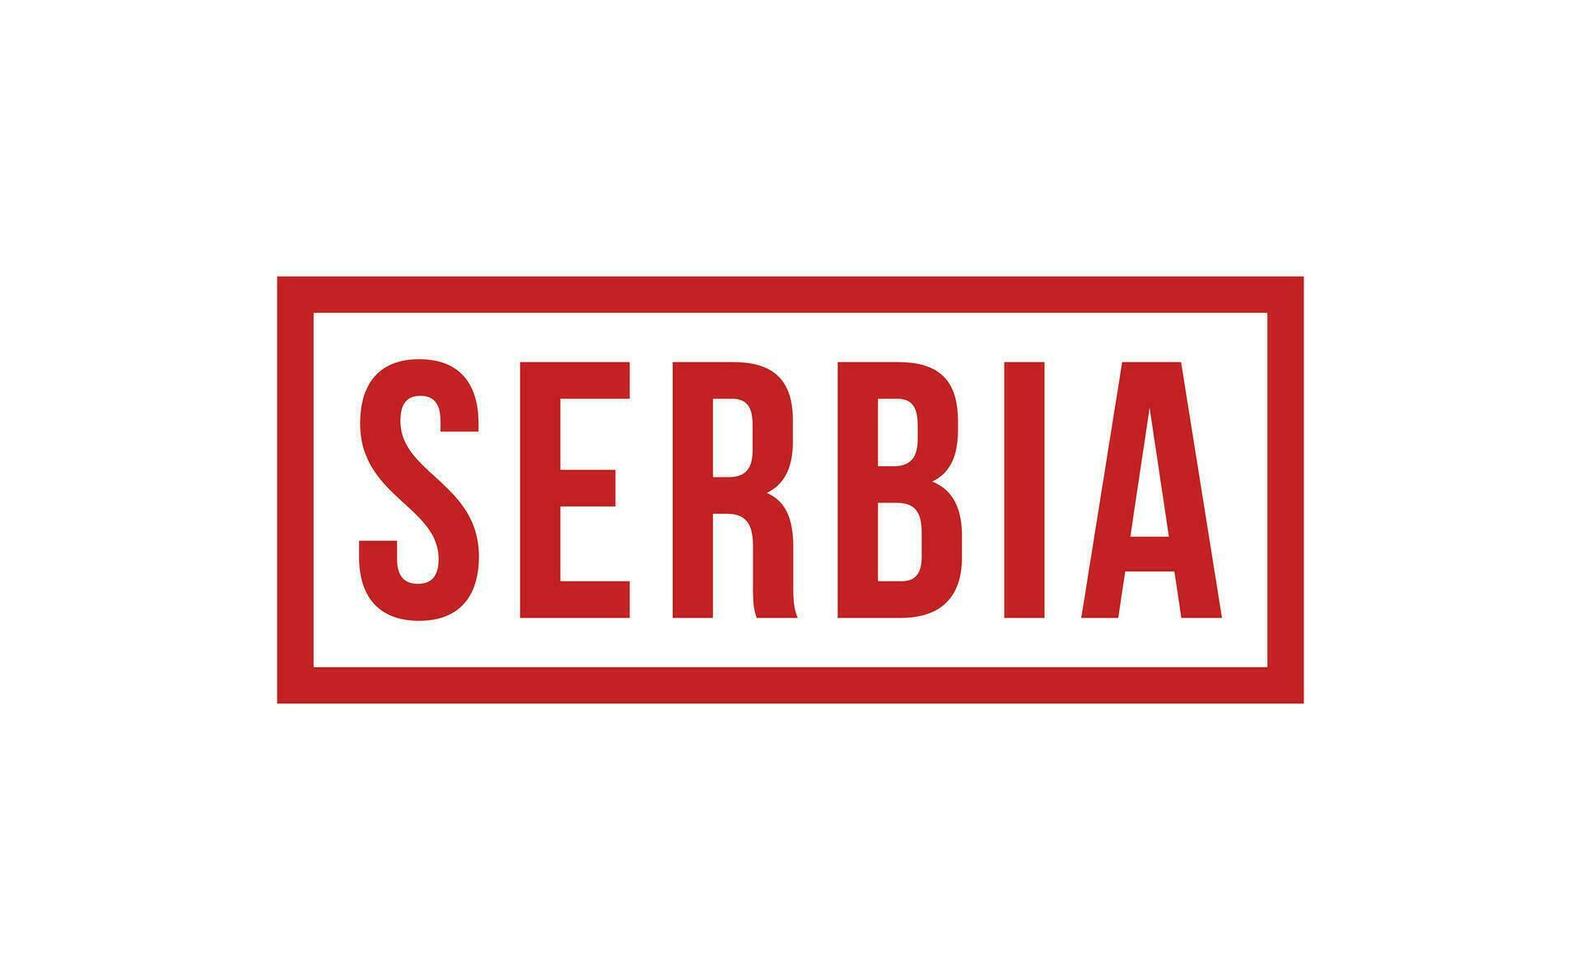 Serbia Rubber Stamp Seal Vector